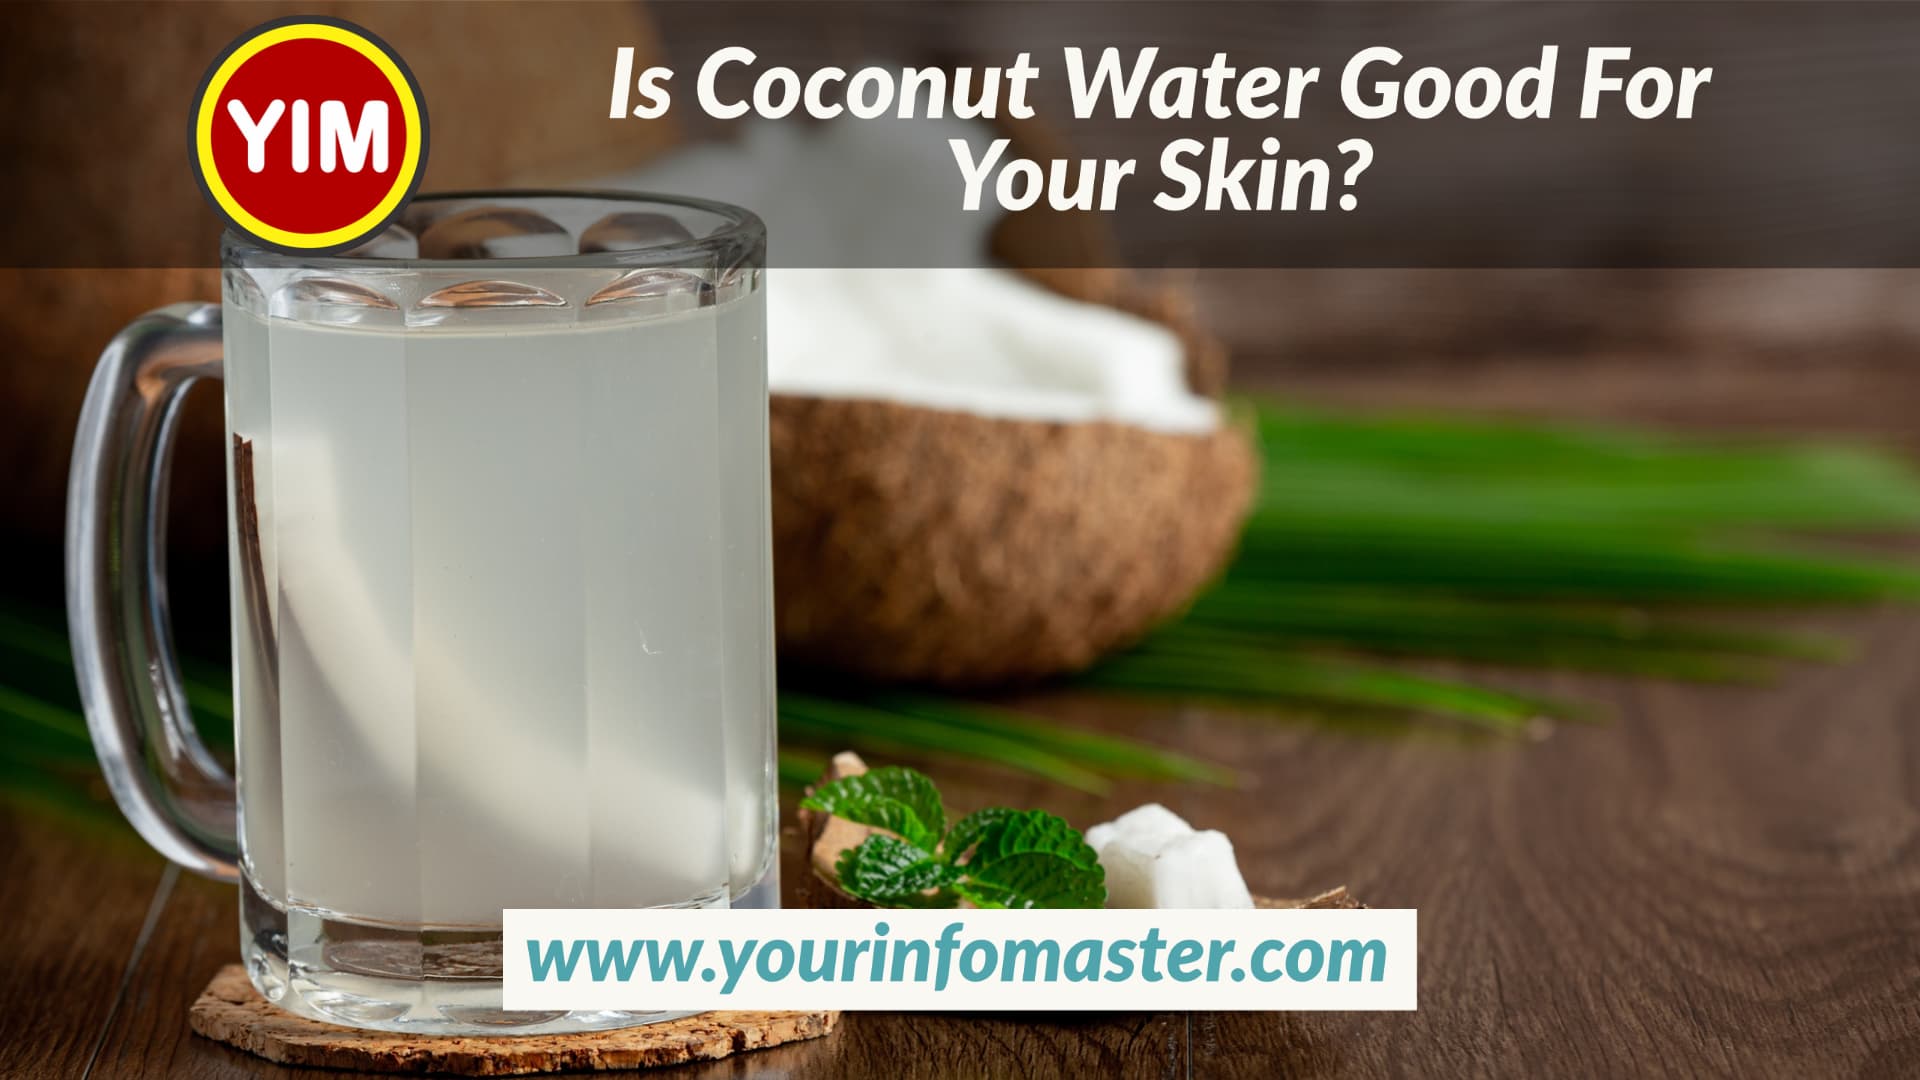 Benefits of Coconut Water for Skin, Benefits of consuming coconut water for skin, How to use coconut water on your face, Is Coconut Water Good For Your Skin, Polyphasic sleep, prime wellness, pure ohio wellness, restore hyper wellness, sleep and wellness centers, Sleep requirement genetic mutation, sleep wellness institute, Sleeping habits, surterra wellness, The effect of hard water on hair, theory wellness, ultimate guide, us wellness meats, wellness elements, What coconut water can’t do for skin, xpress wellness